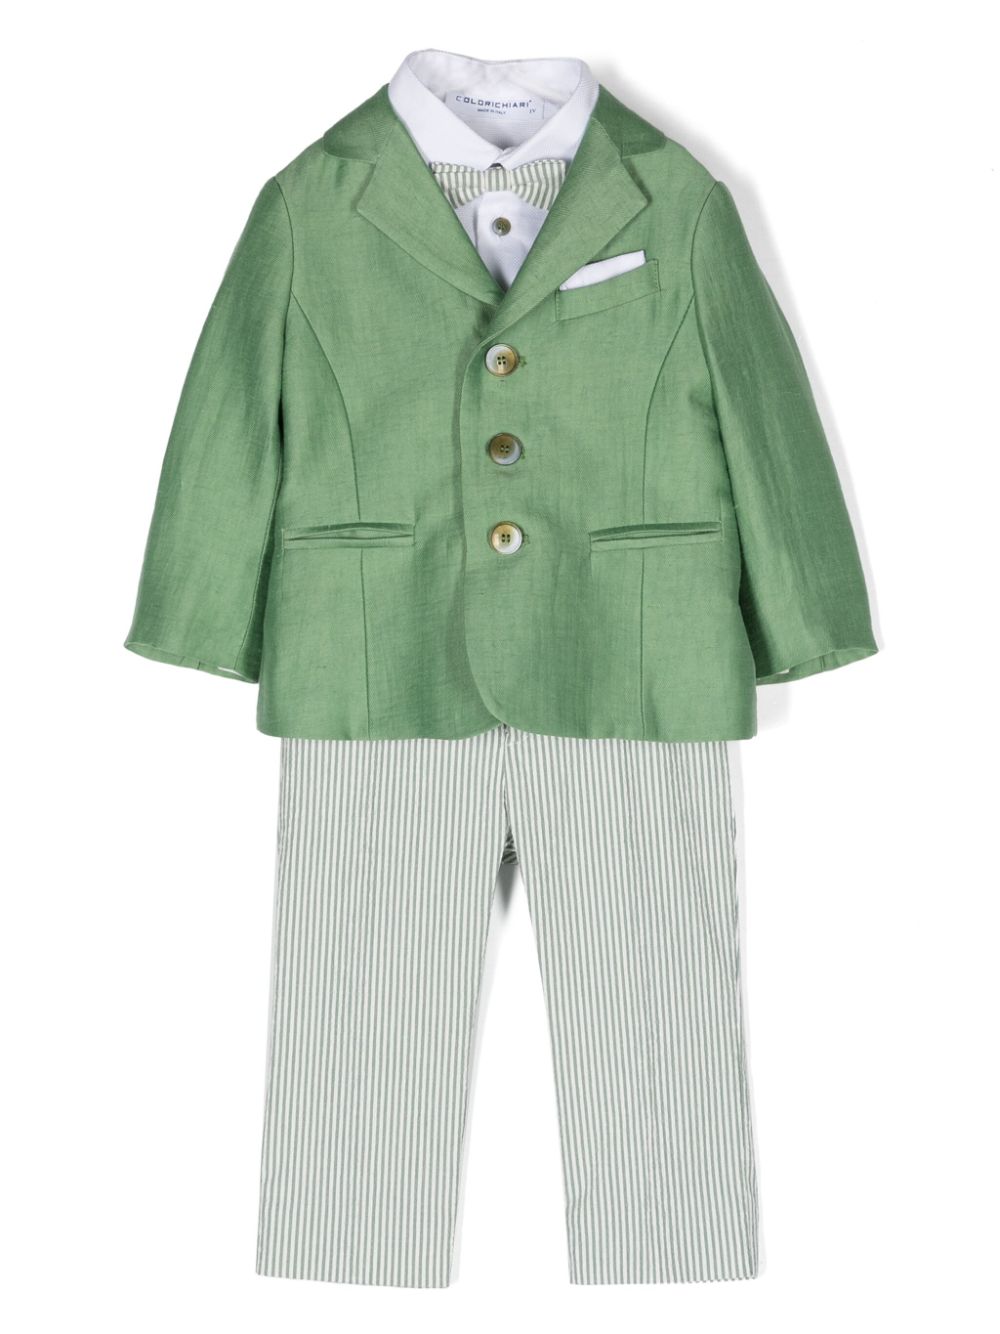 Elegant green and white outfit for newborns